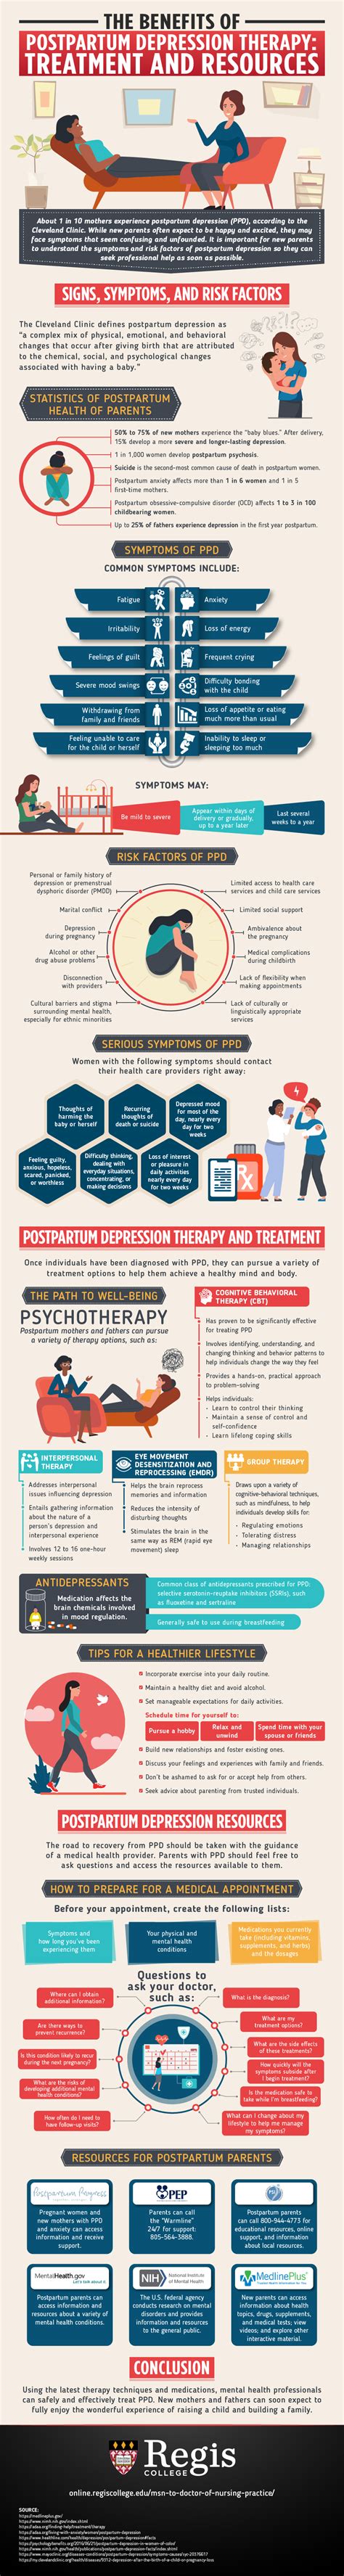 Benefits Of Postpartum Depression Therapy Treatment And Resources